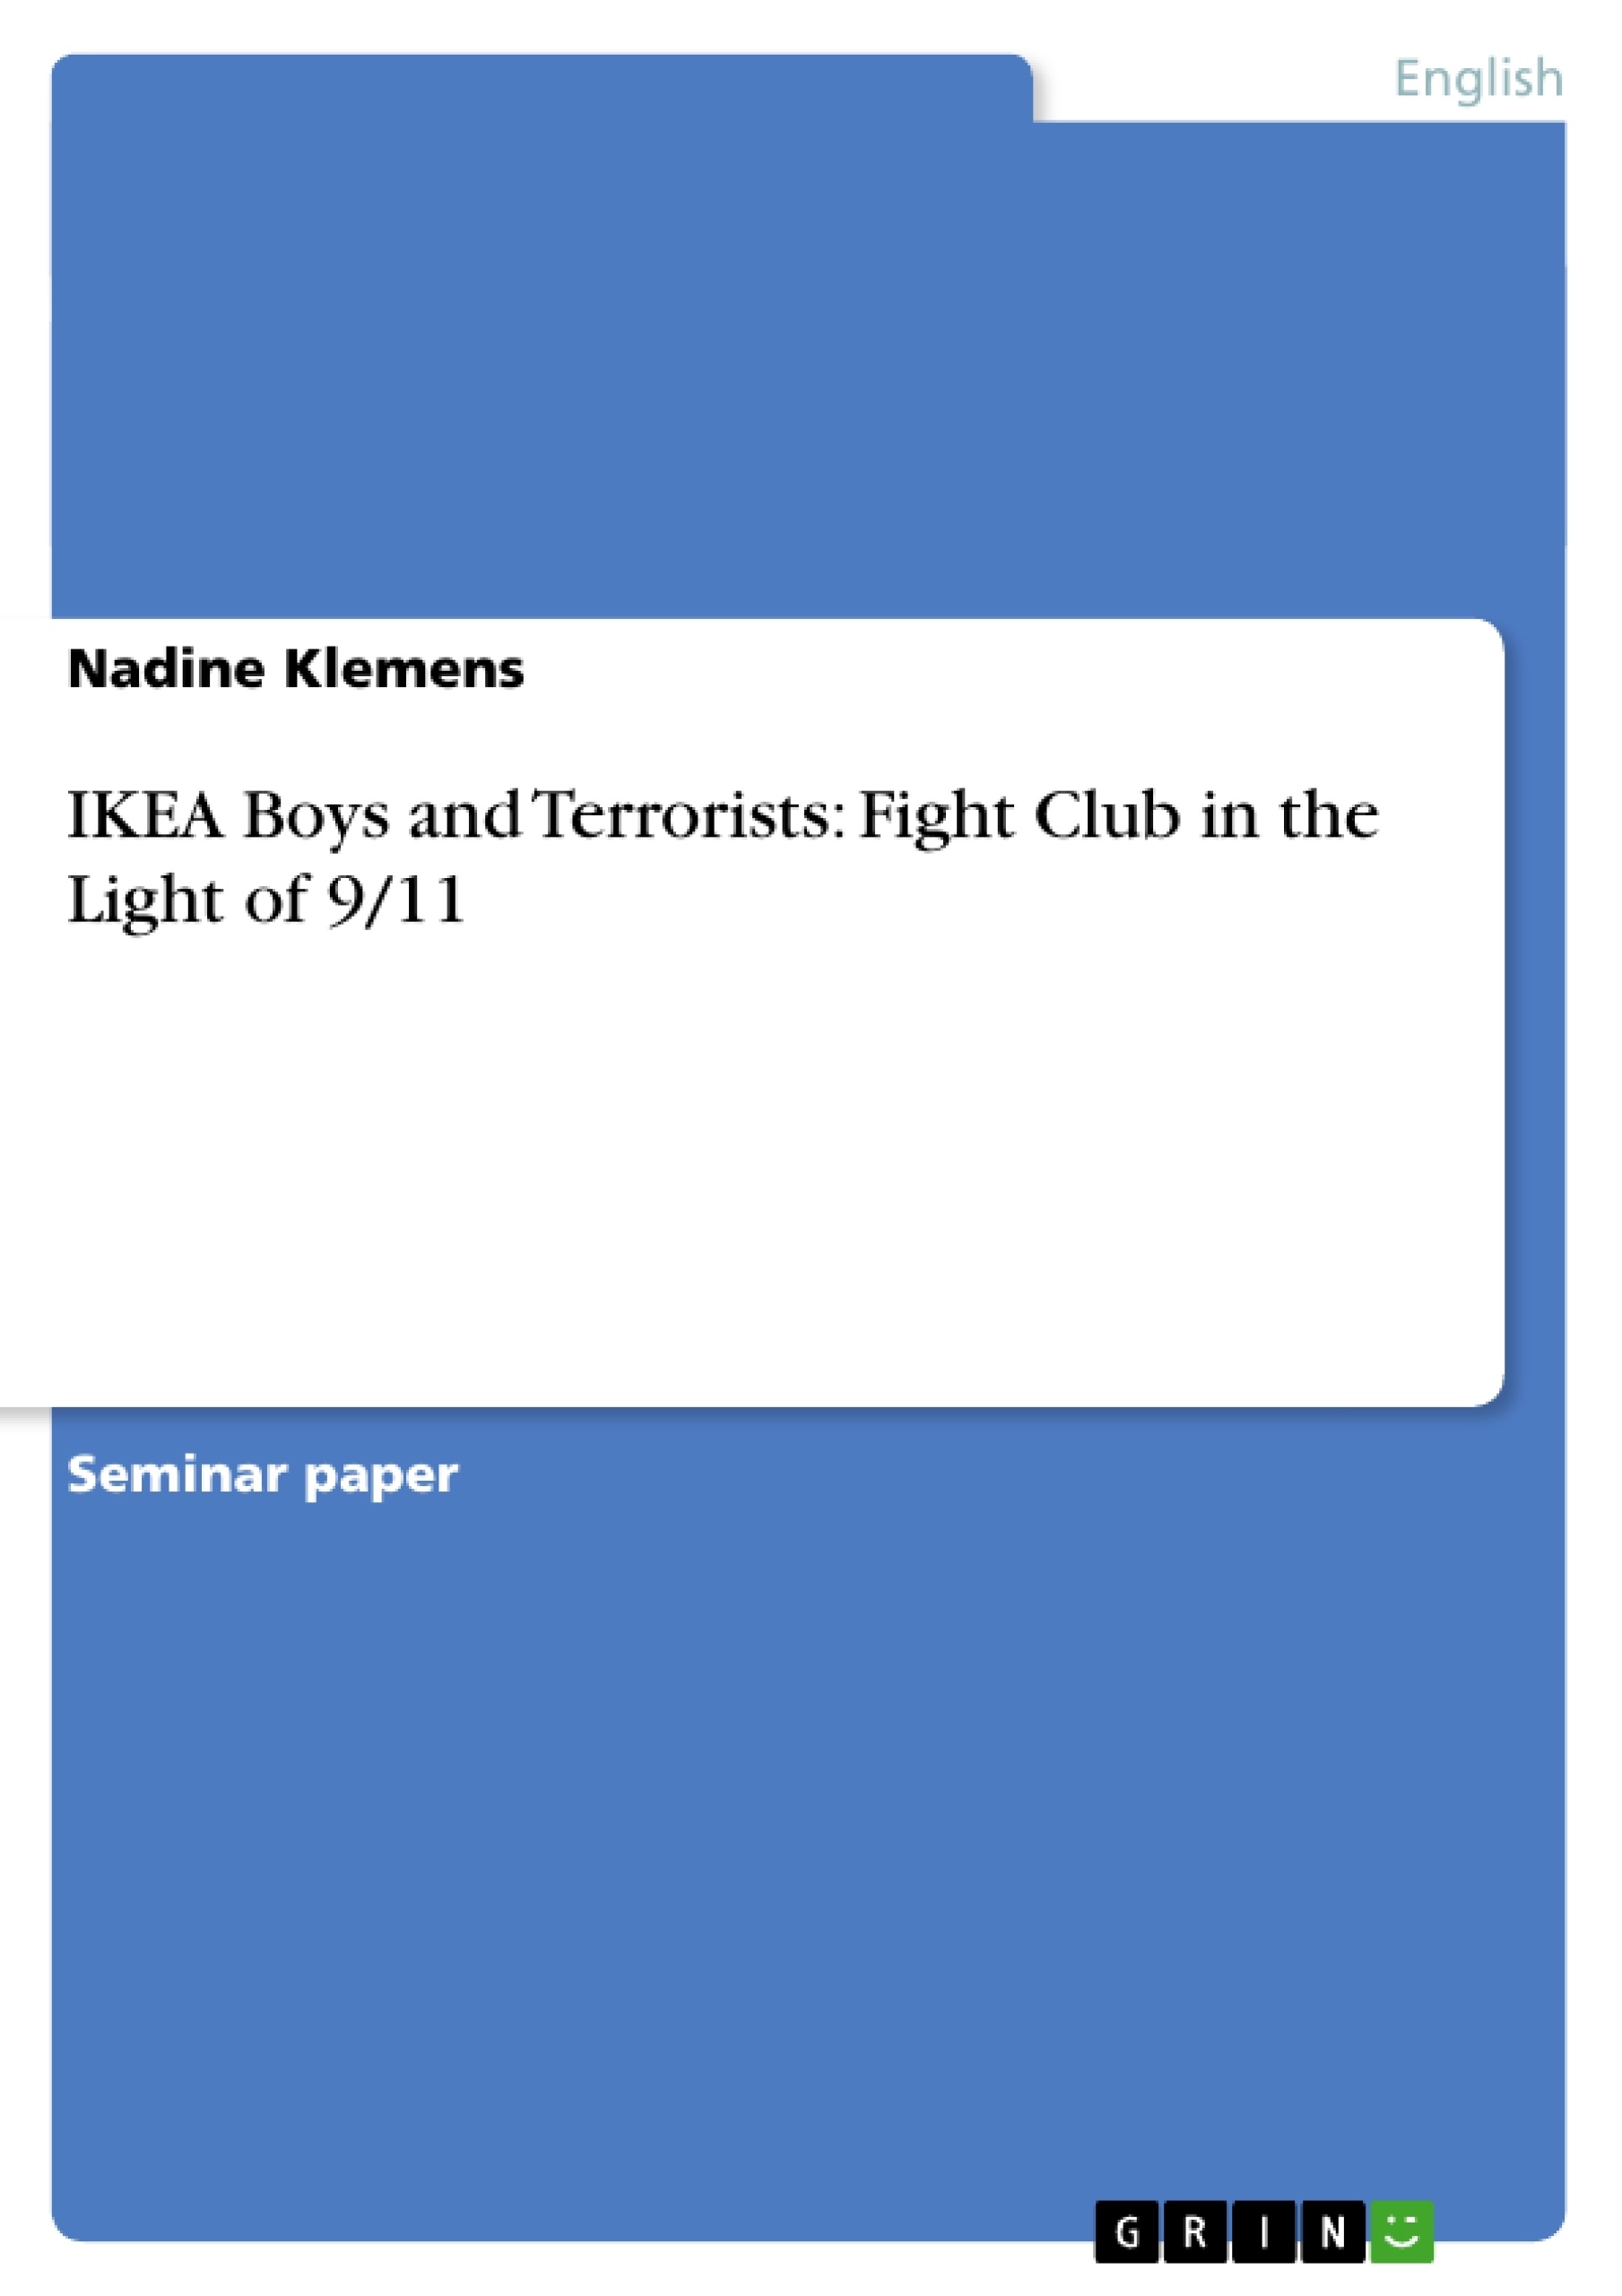 Title: IKEA Boys and Terrorists: Fight Club in the Light of 9/11